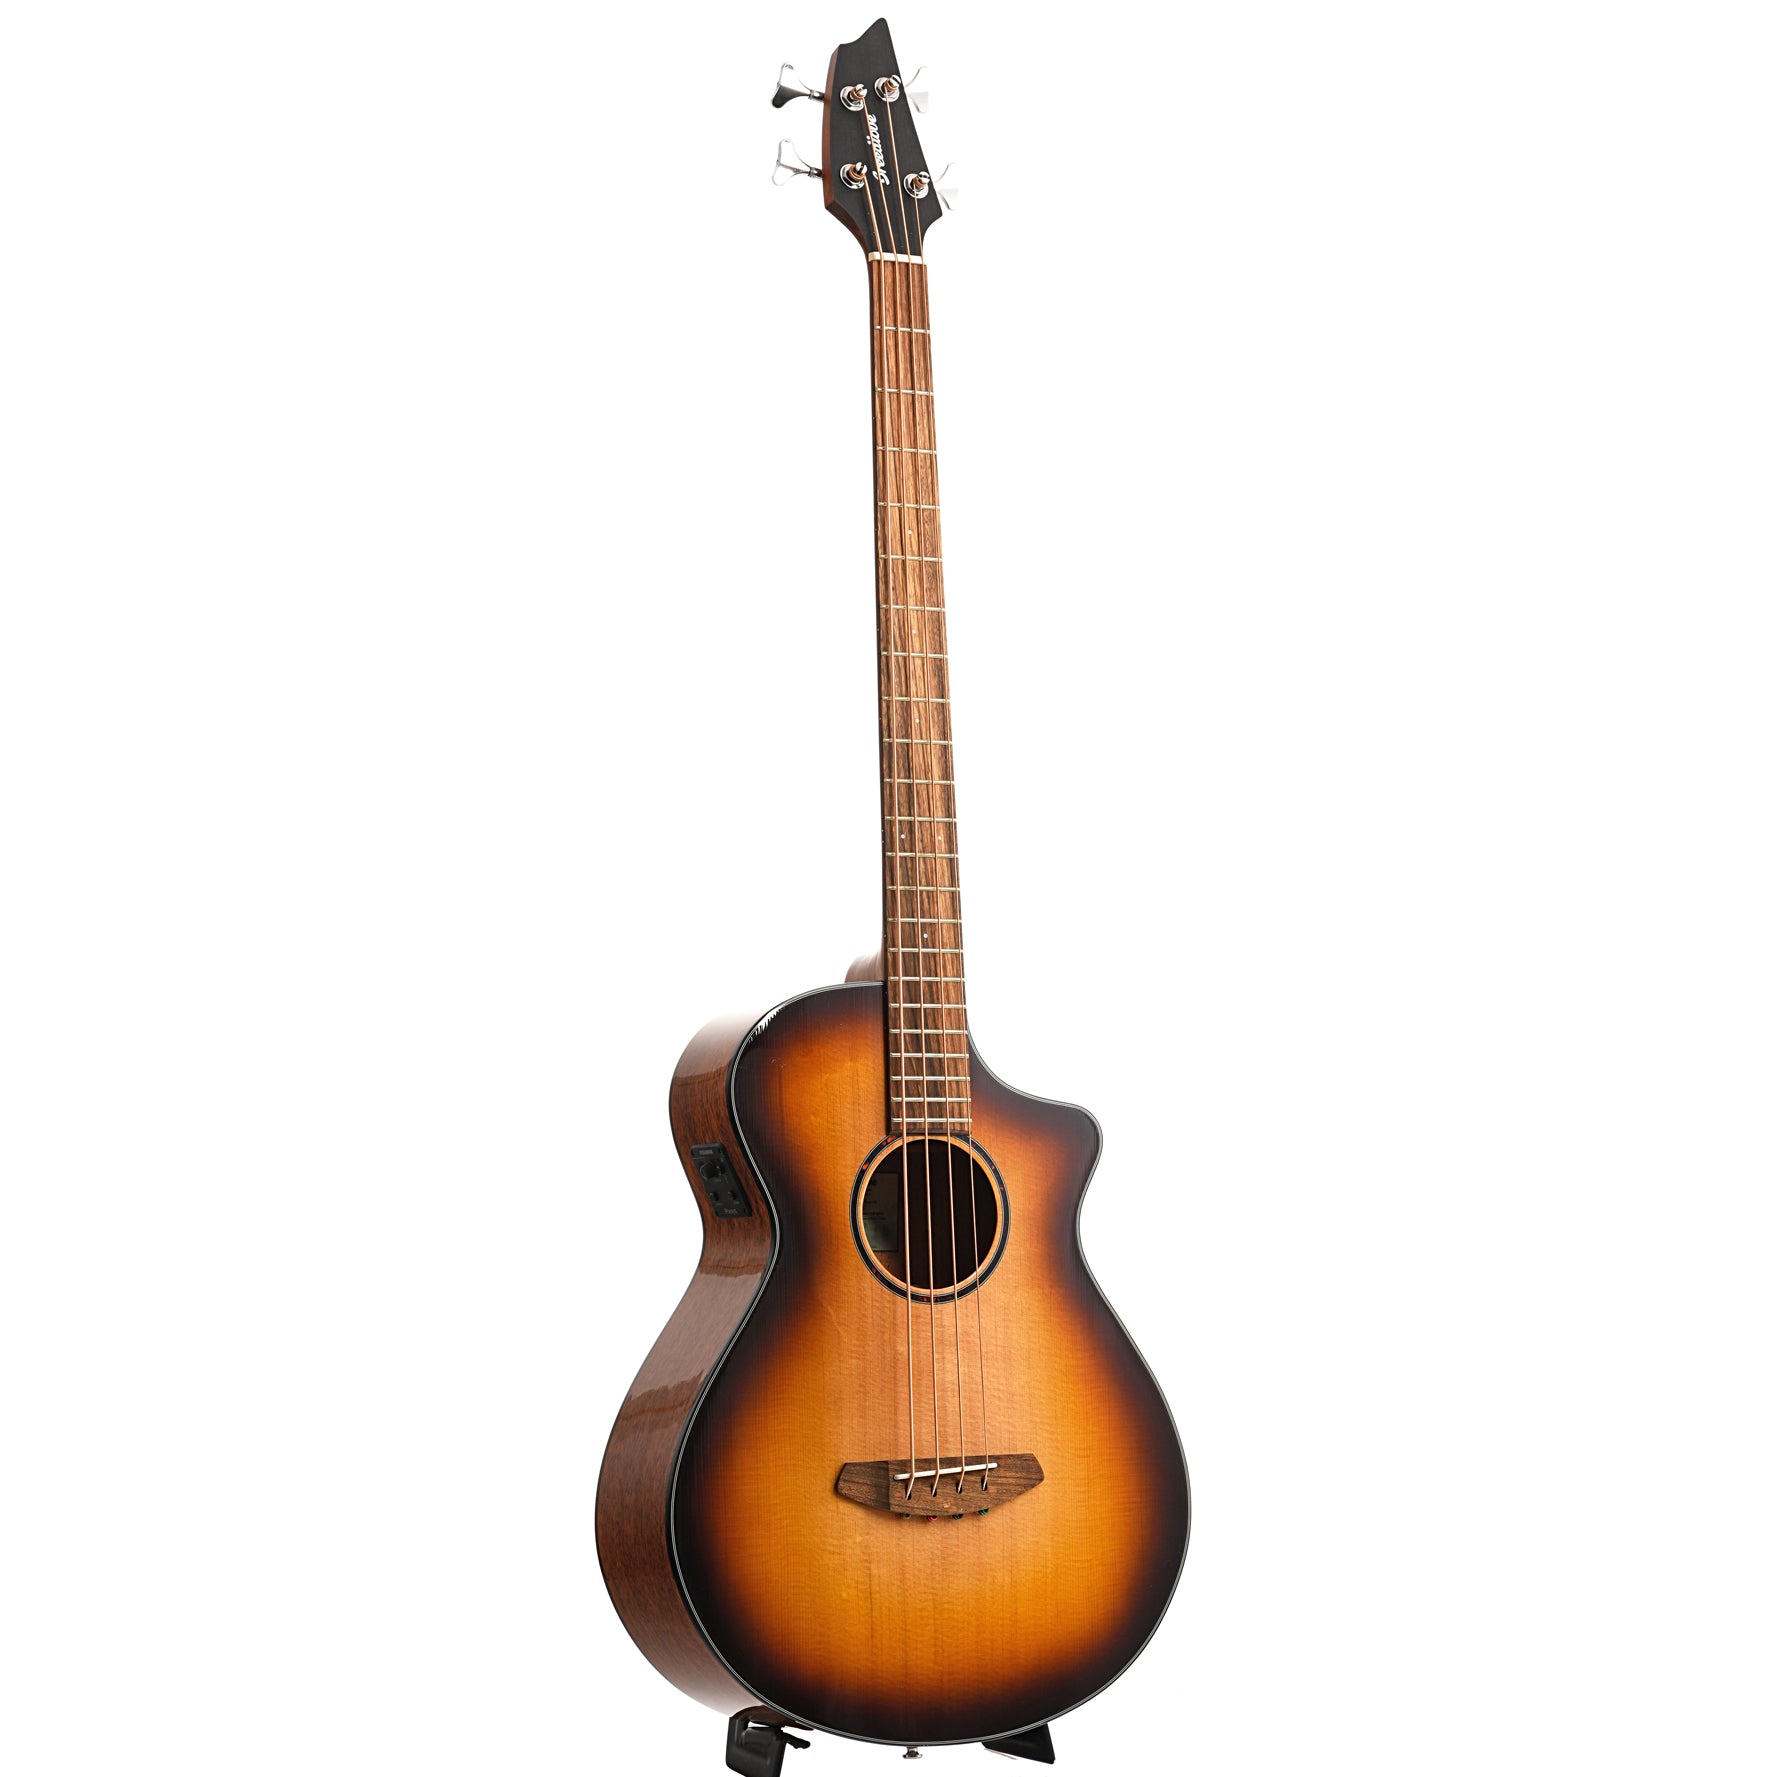 Image 11 of Breedlove Discovery S Concert Edgeburst Bass CE Sitka-African Mahogany Acoustic-Electric Bass Guitar - SKU# DSCN44BCESSAM : Product Type Flat-top Guitars : Elderly Instruments